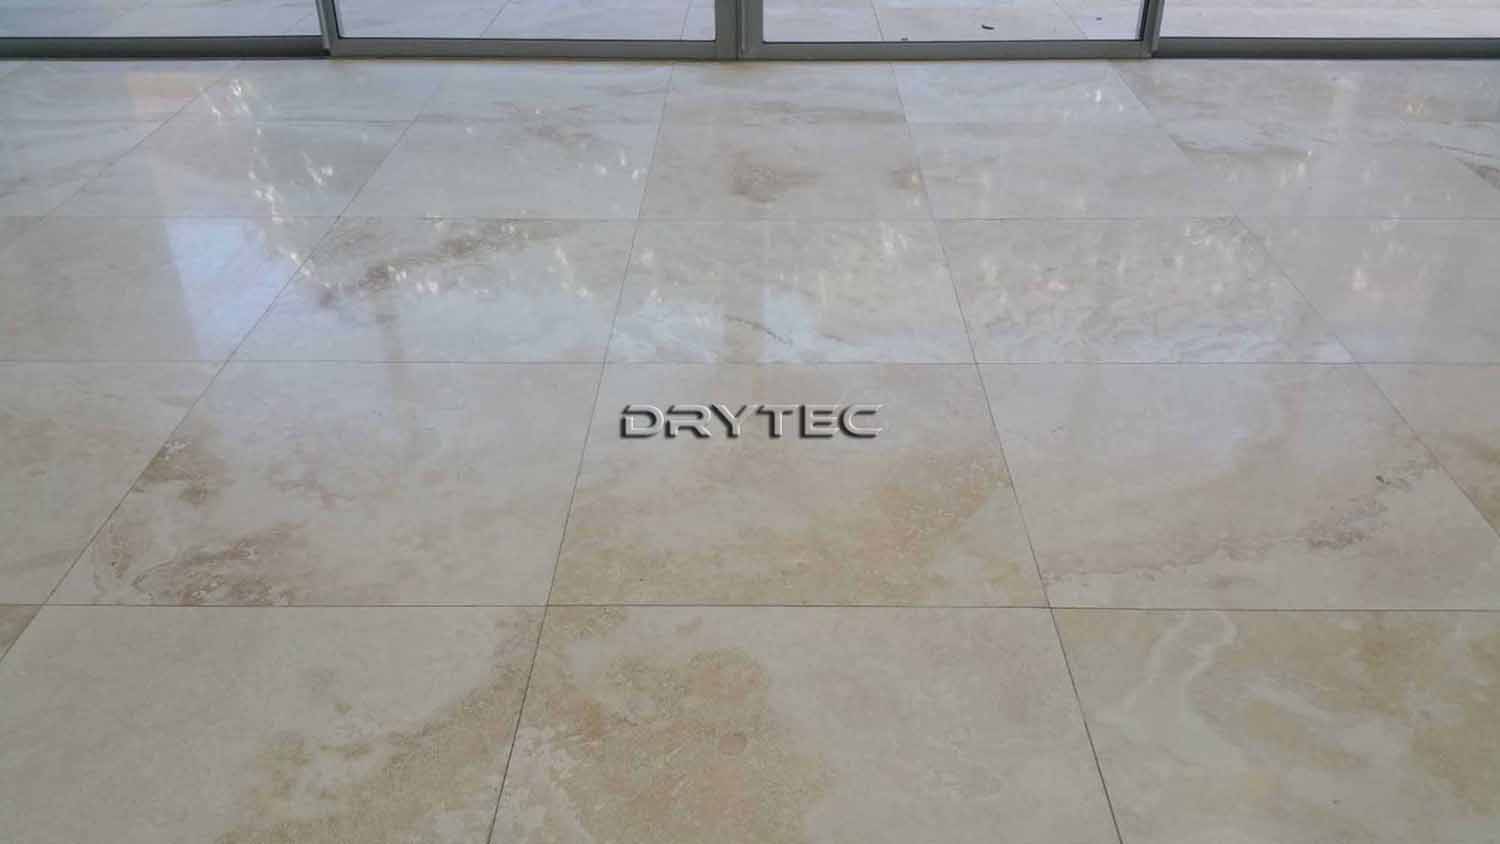 Travertine Floor Tiles Restoration-Grinding-Honing-Polishing-Cleaning and Sealing Service in Perth WA